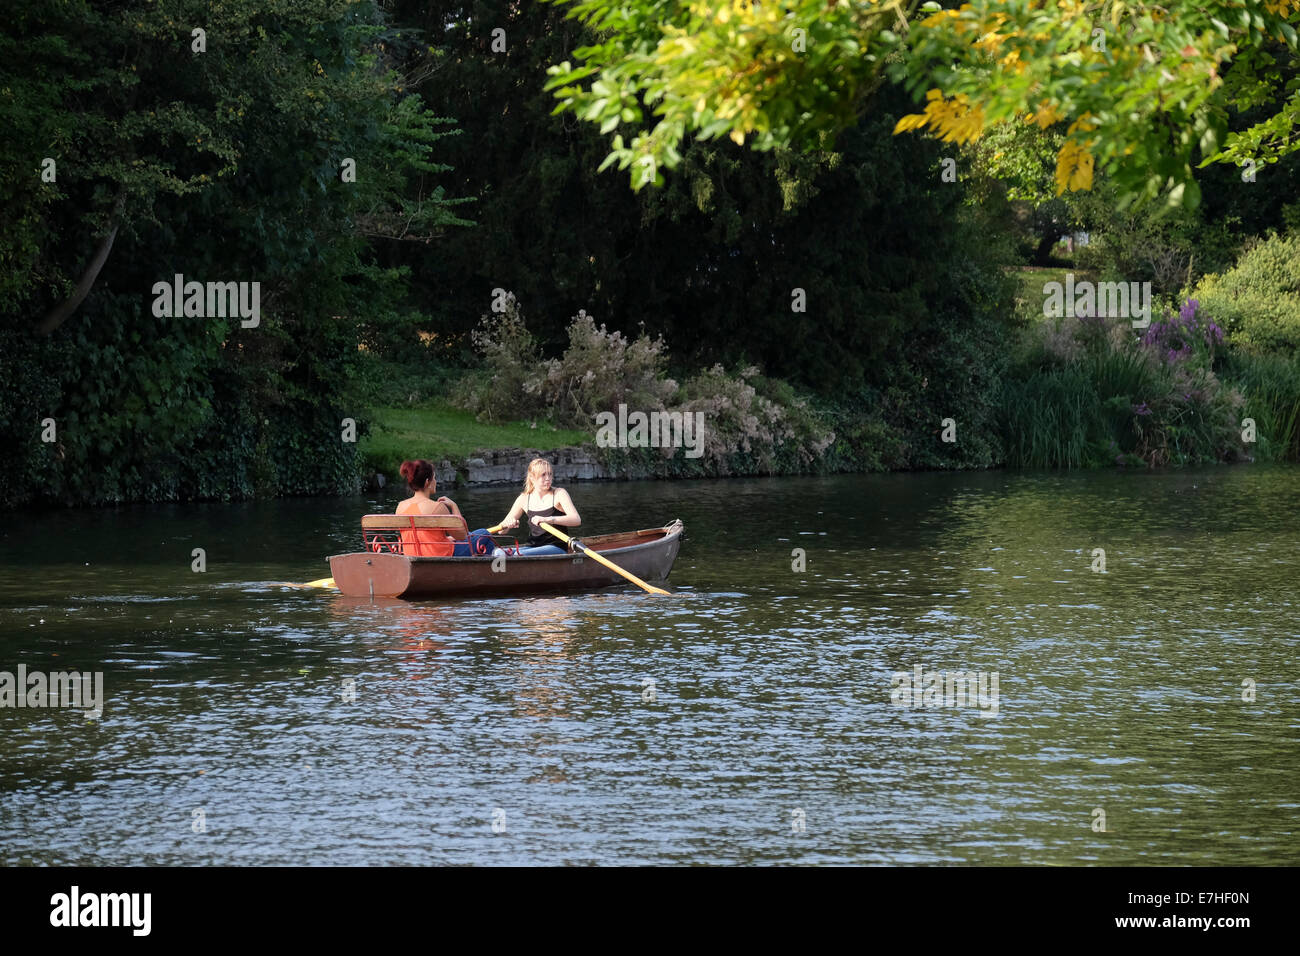 Couple of young women rowing on the River Avon at Stratford Stock Photo